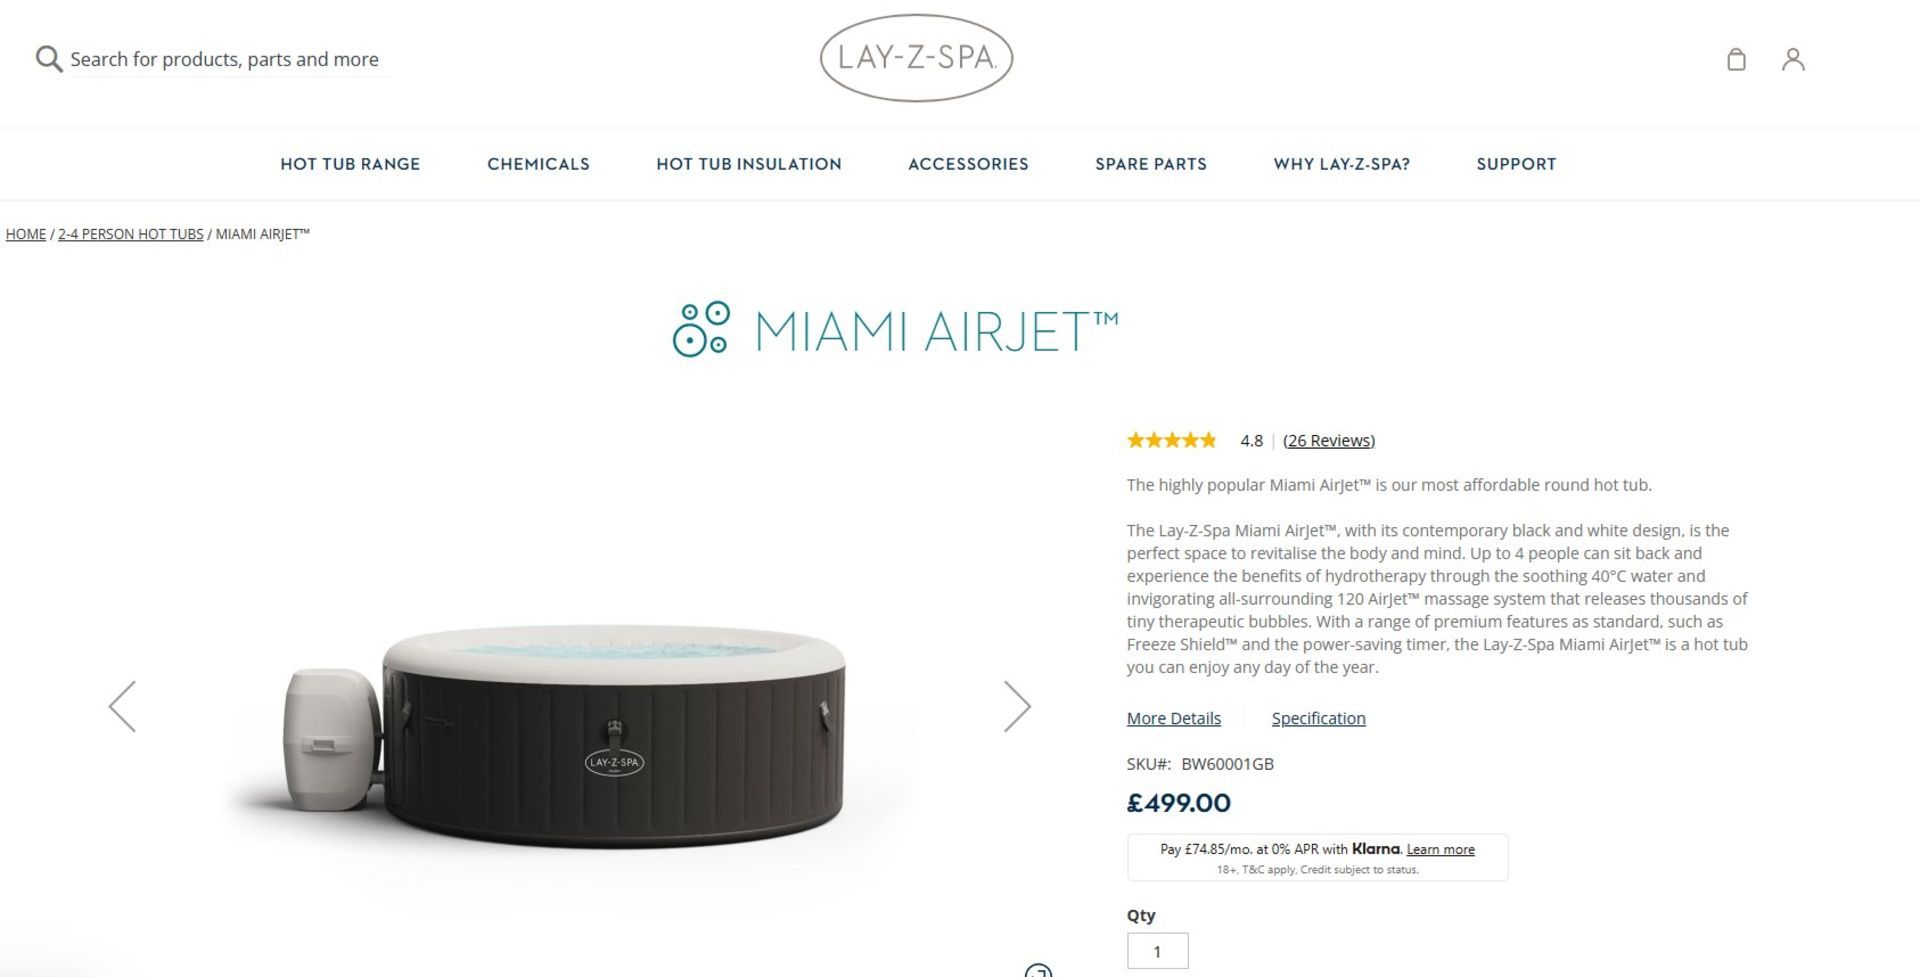 NEW & BOXED LAY-Z-SPA 4 PERSON MIAMI AIRJET. The highly popular Miami AirJet™ is our most affordable